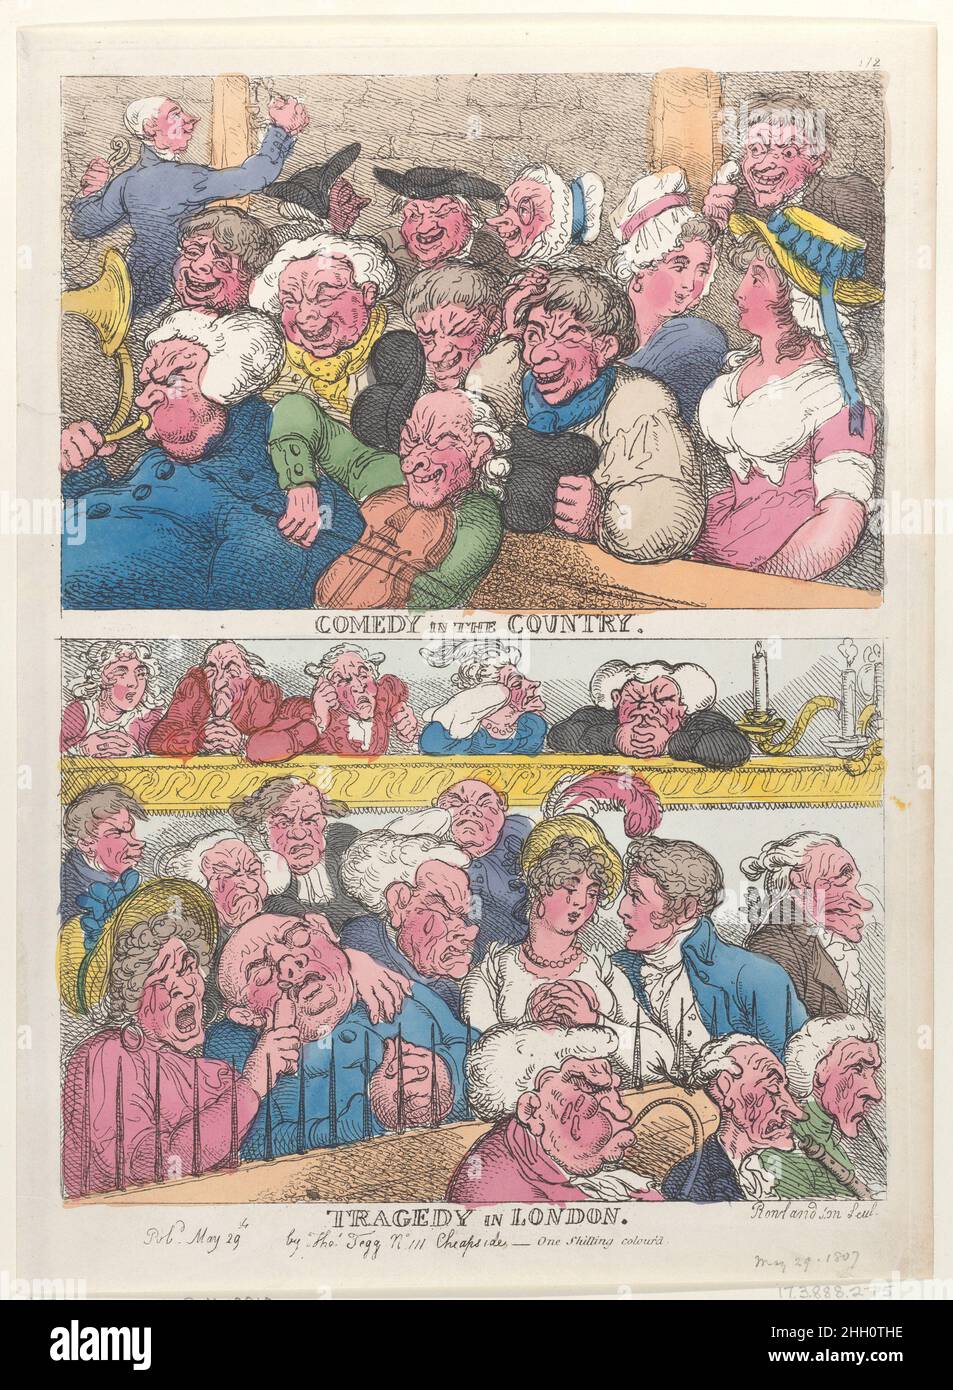 Comedy in the Country, Tragedy in London May 29, 1807 Thomas Rowlandson At top, a group of men and two women sit behind the orchestra, laughing. Below, spectators sit crying behind a weeping orchestra. A woman administers a smelling bottle to a fainting, crying man at left.. Comedy in the Country, Tragedy in London. Thomas Rowlandson (British, London 1757–1827 London). May 29, 1807. Hand-colored etching. Thomas Tegg (British, 1776–1846). Prints Stock Photo